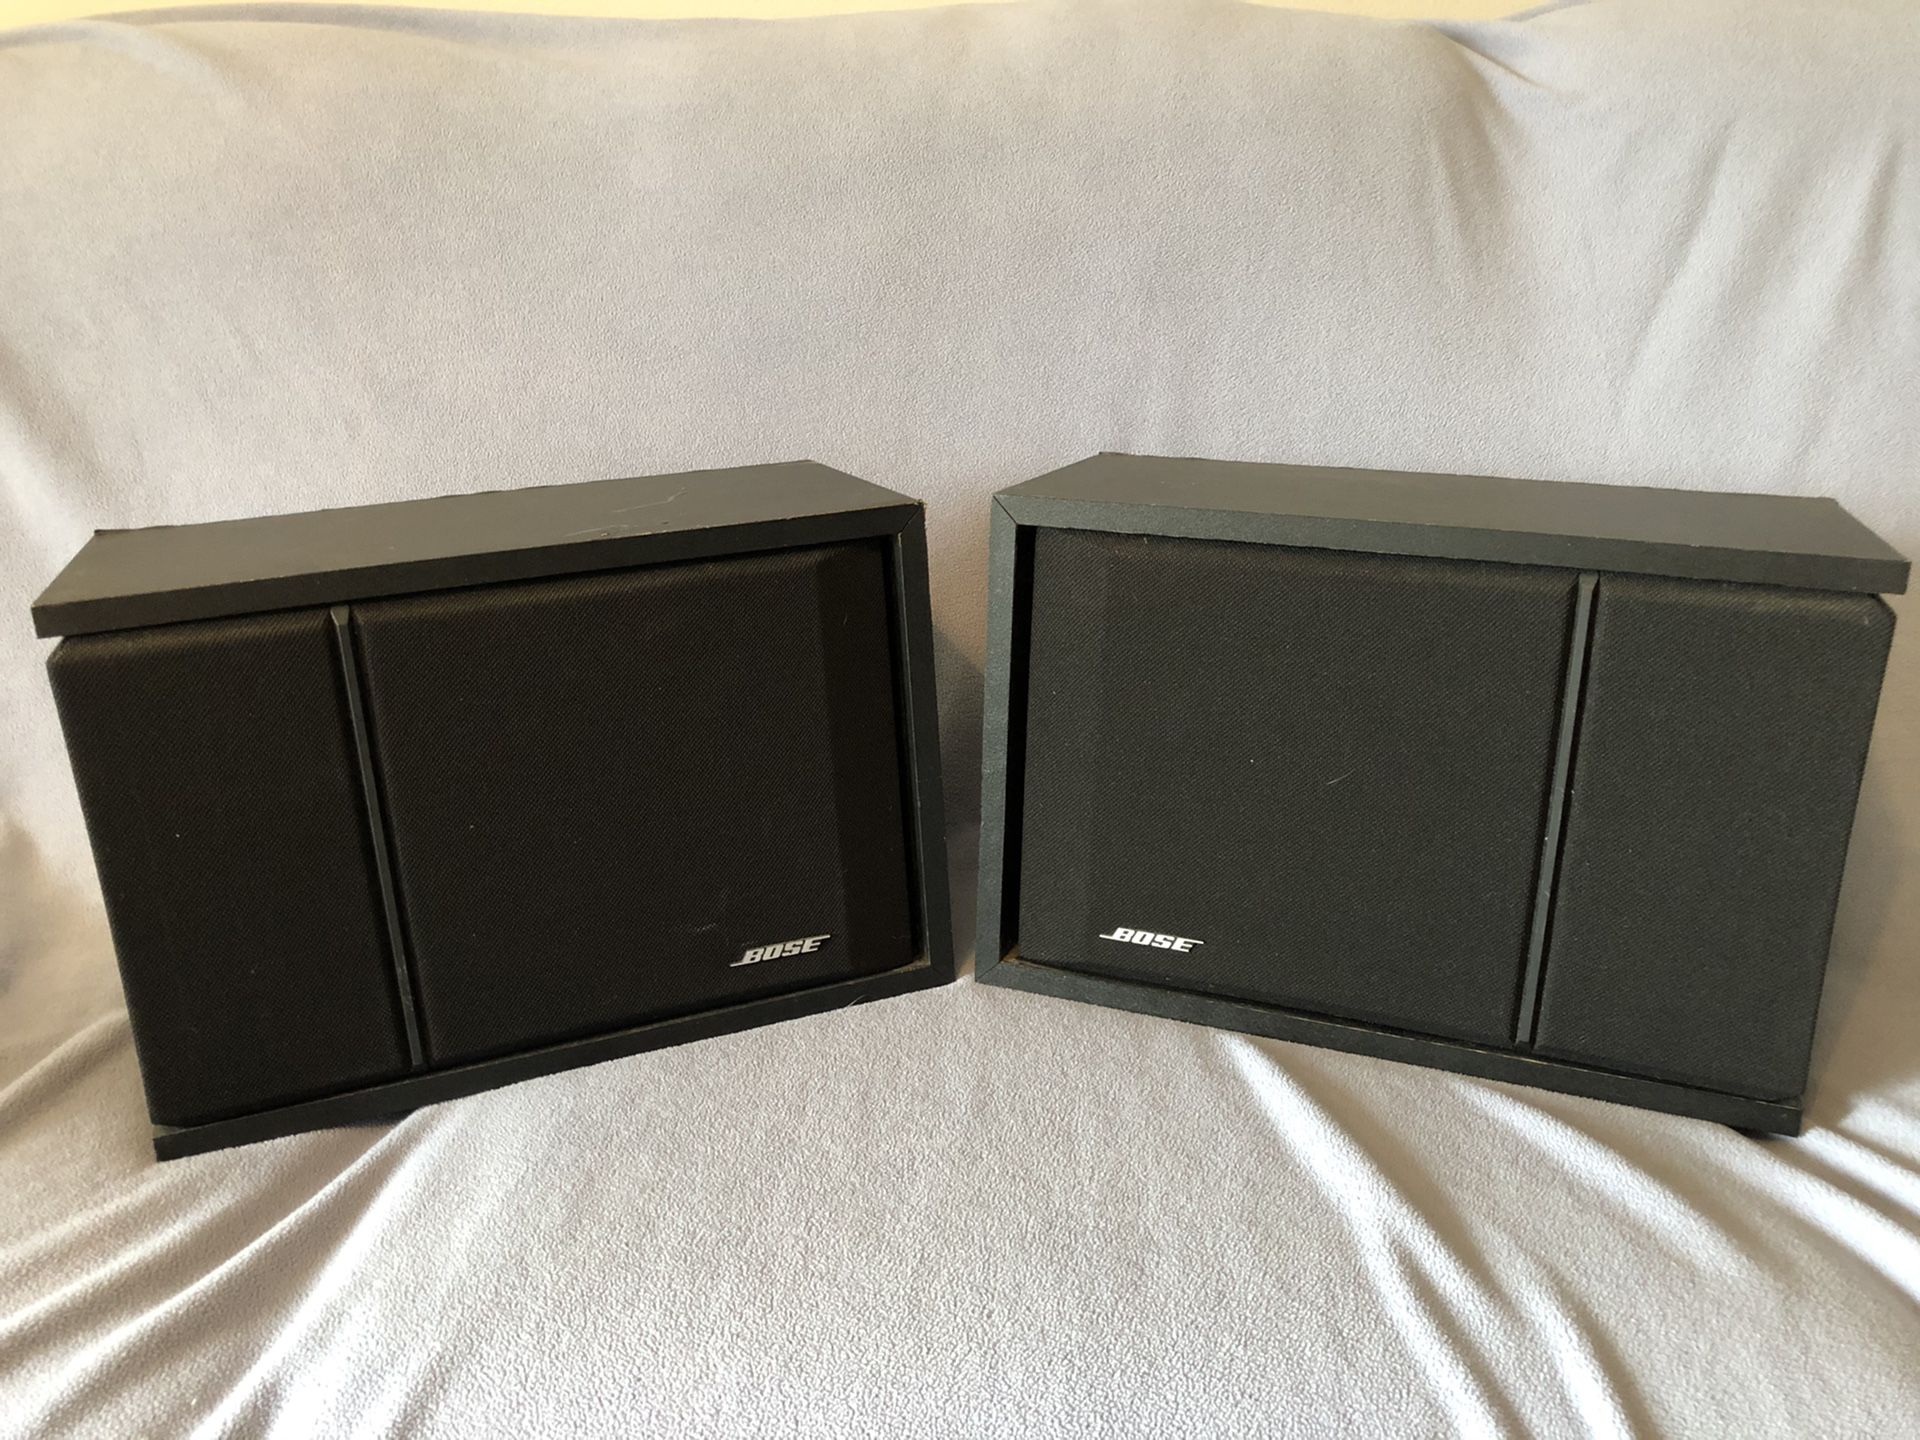 Bose 201 Series III left and right speaker pair. Please see photos for condition. They sound great and will fill the whole room with sound. Ask any